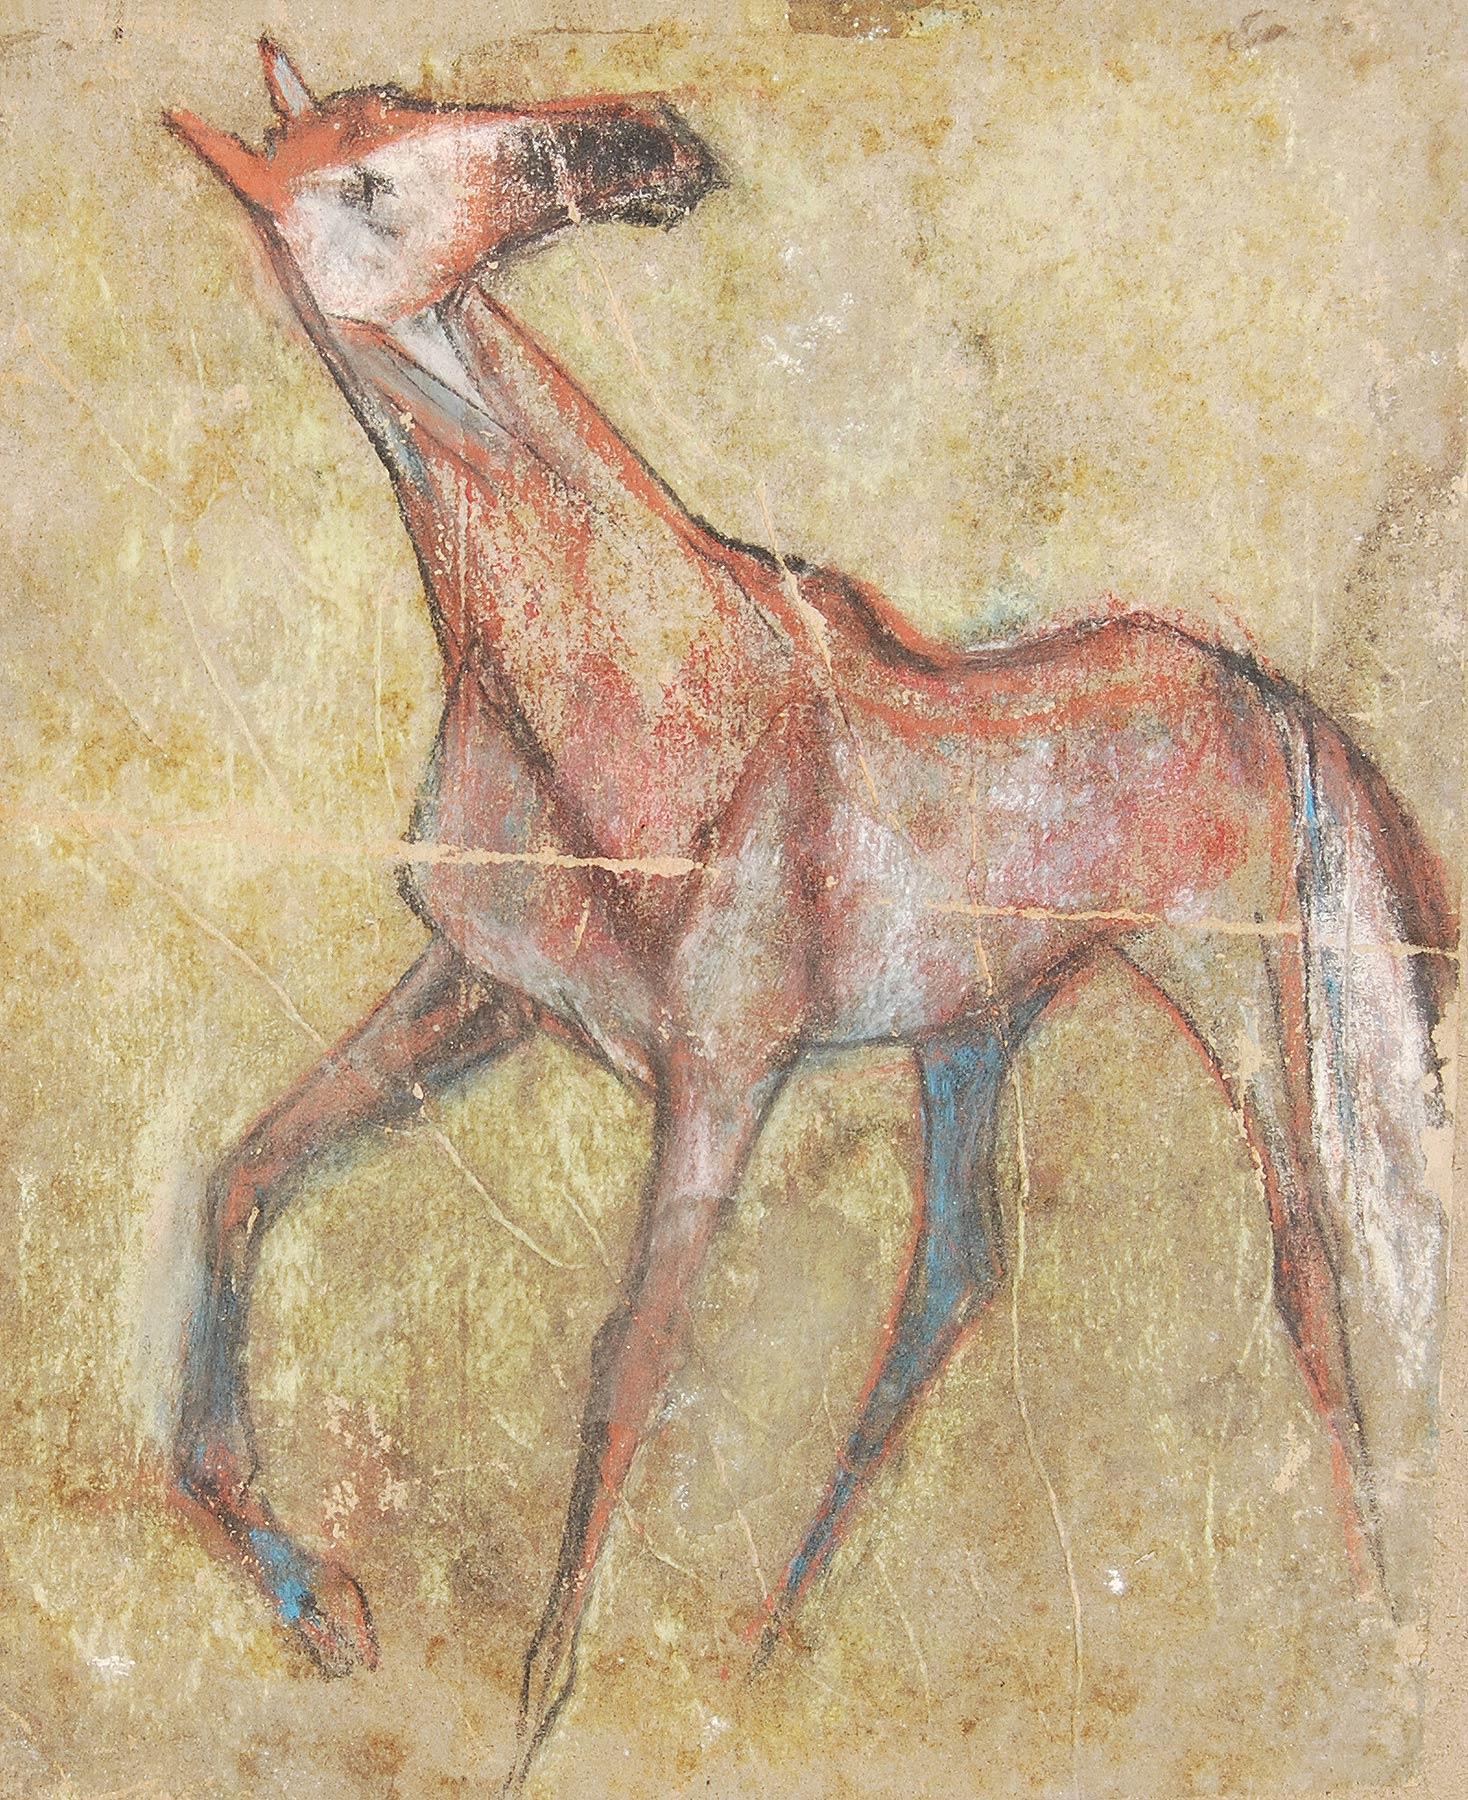 Sunil Das Animal Painting - Horse I, Pastel on Sand Paper, Brown, Red, Green, Blue by Indian Artist"In Stock"